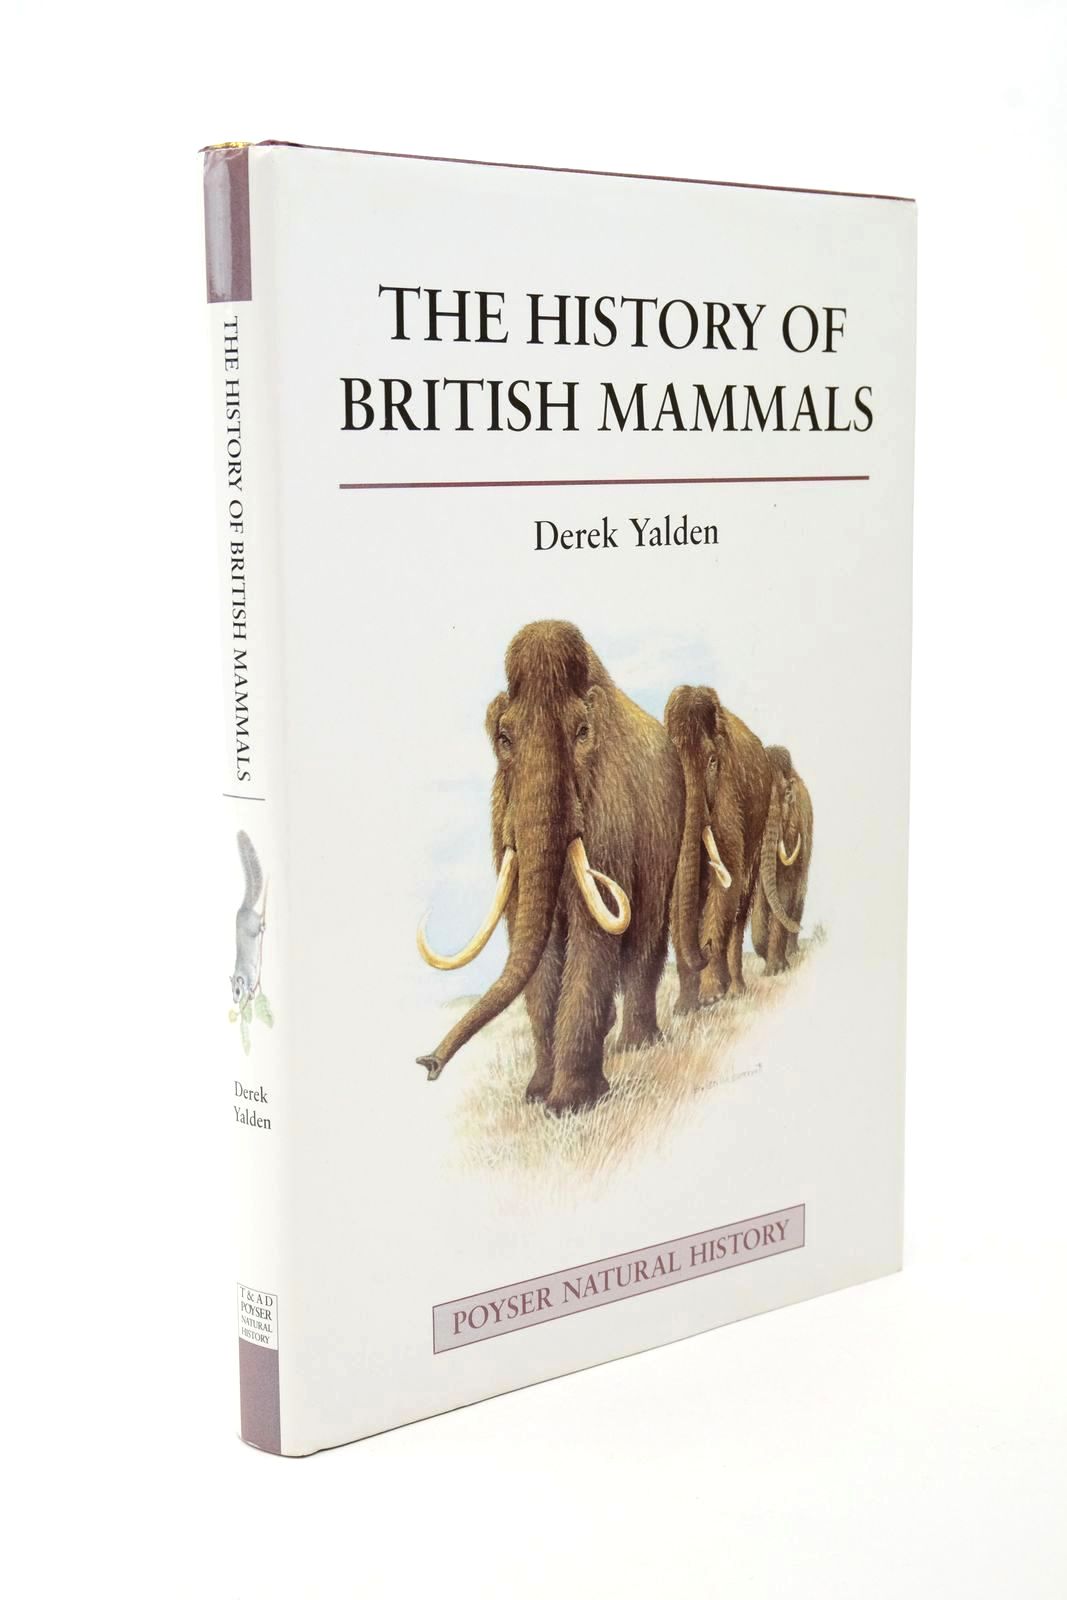 Photo of THE HISTORY OF BRITISH MAMMALS written by Yalden, Derek illustrated by Barrett, Priscilla Yalden, Derek published by T. &amp; A.D. Poyser (STOCK CODE: 1322611)  for sale by Stella & Rose's Books